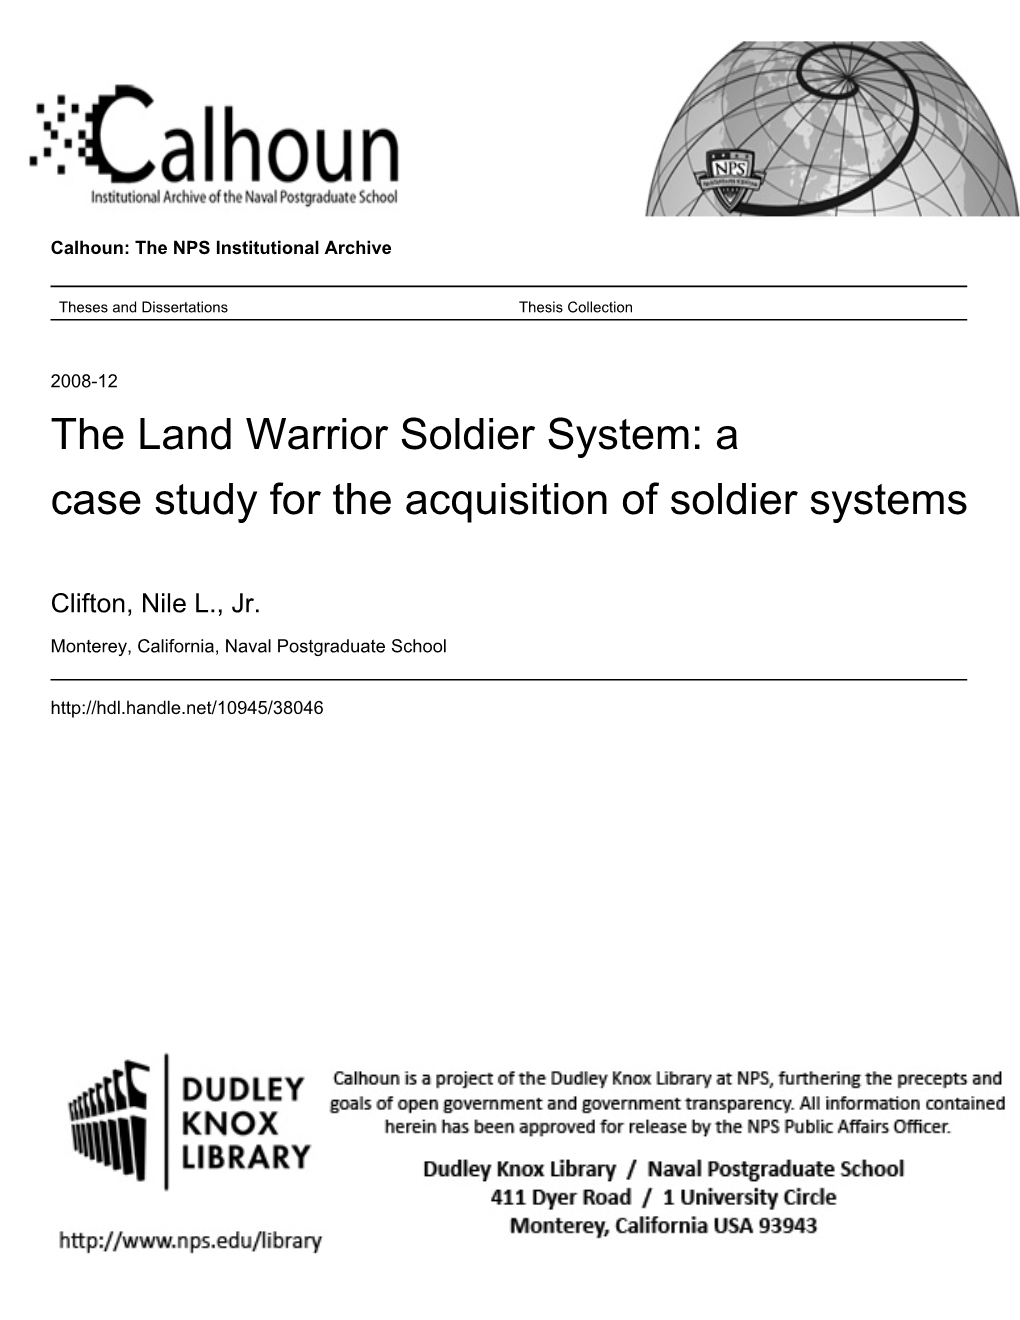 The Land Warrior Soldier System: a Case Study for the Acquisition of Soldier Systems